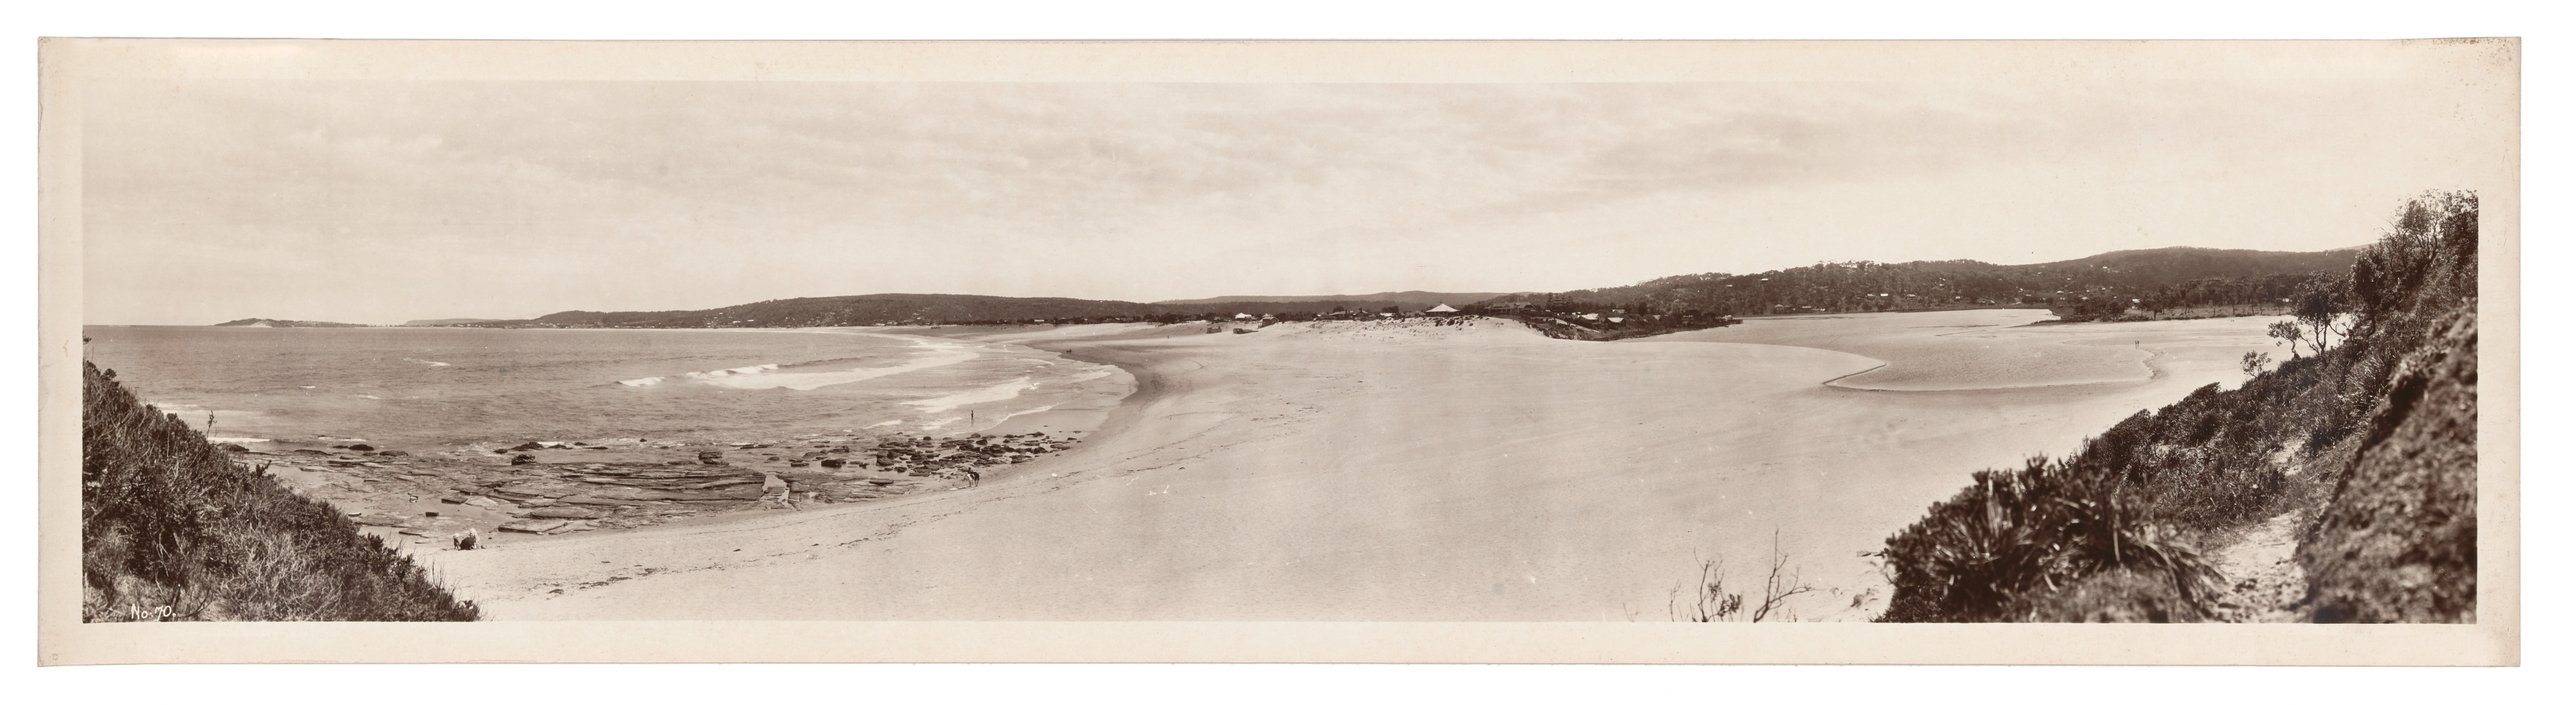 Panoramic photograph of Narabeen beach and lake published by Alan Row & Company